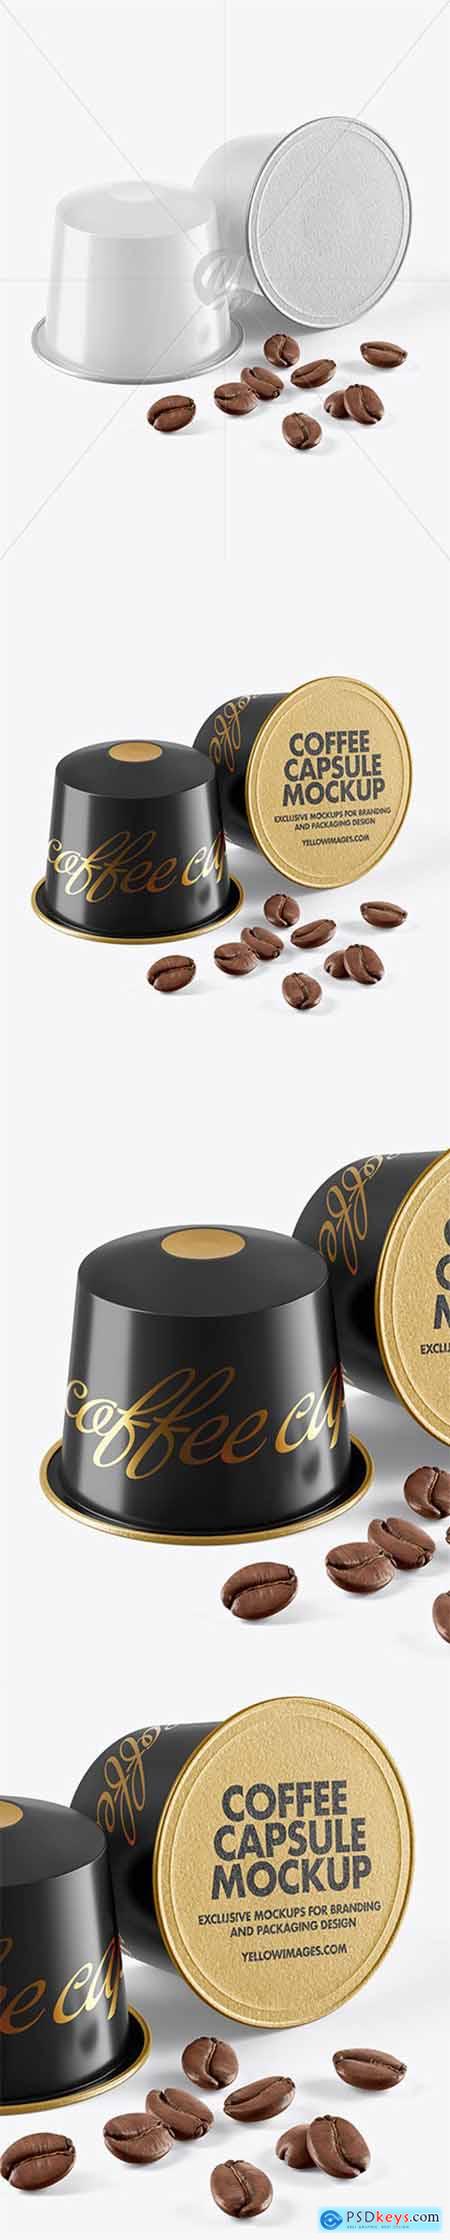 Two Coffee Capsules with Coffee Beans Mockup 59443